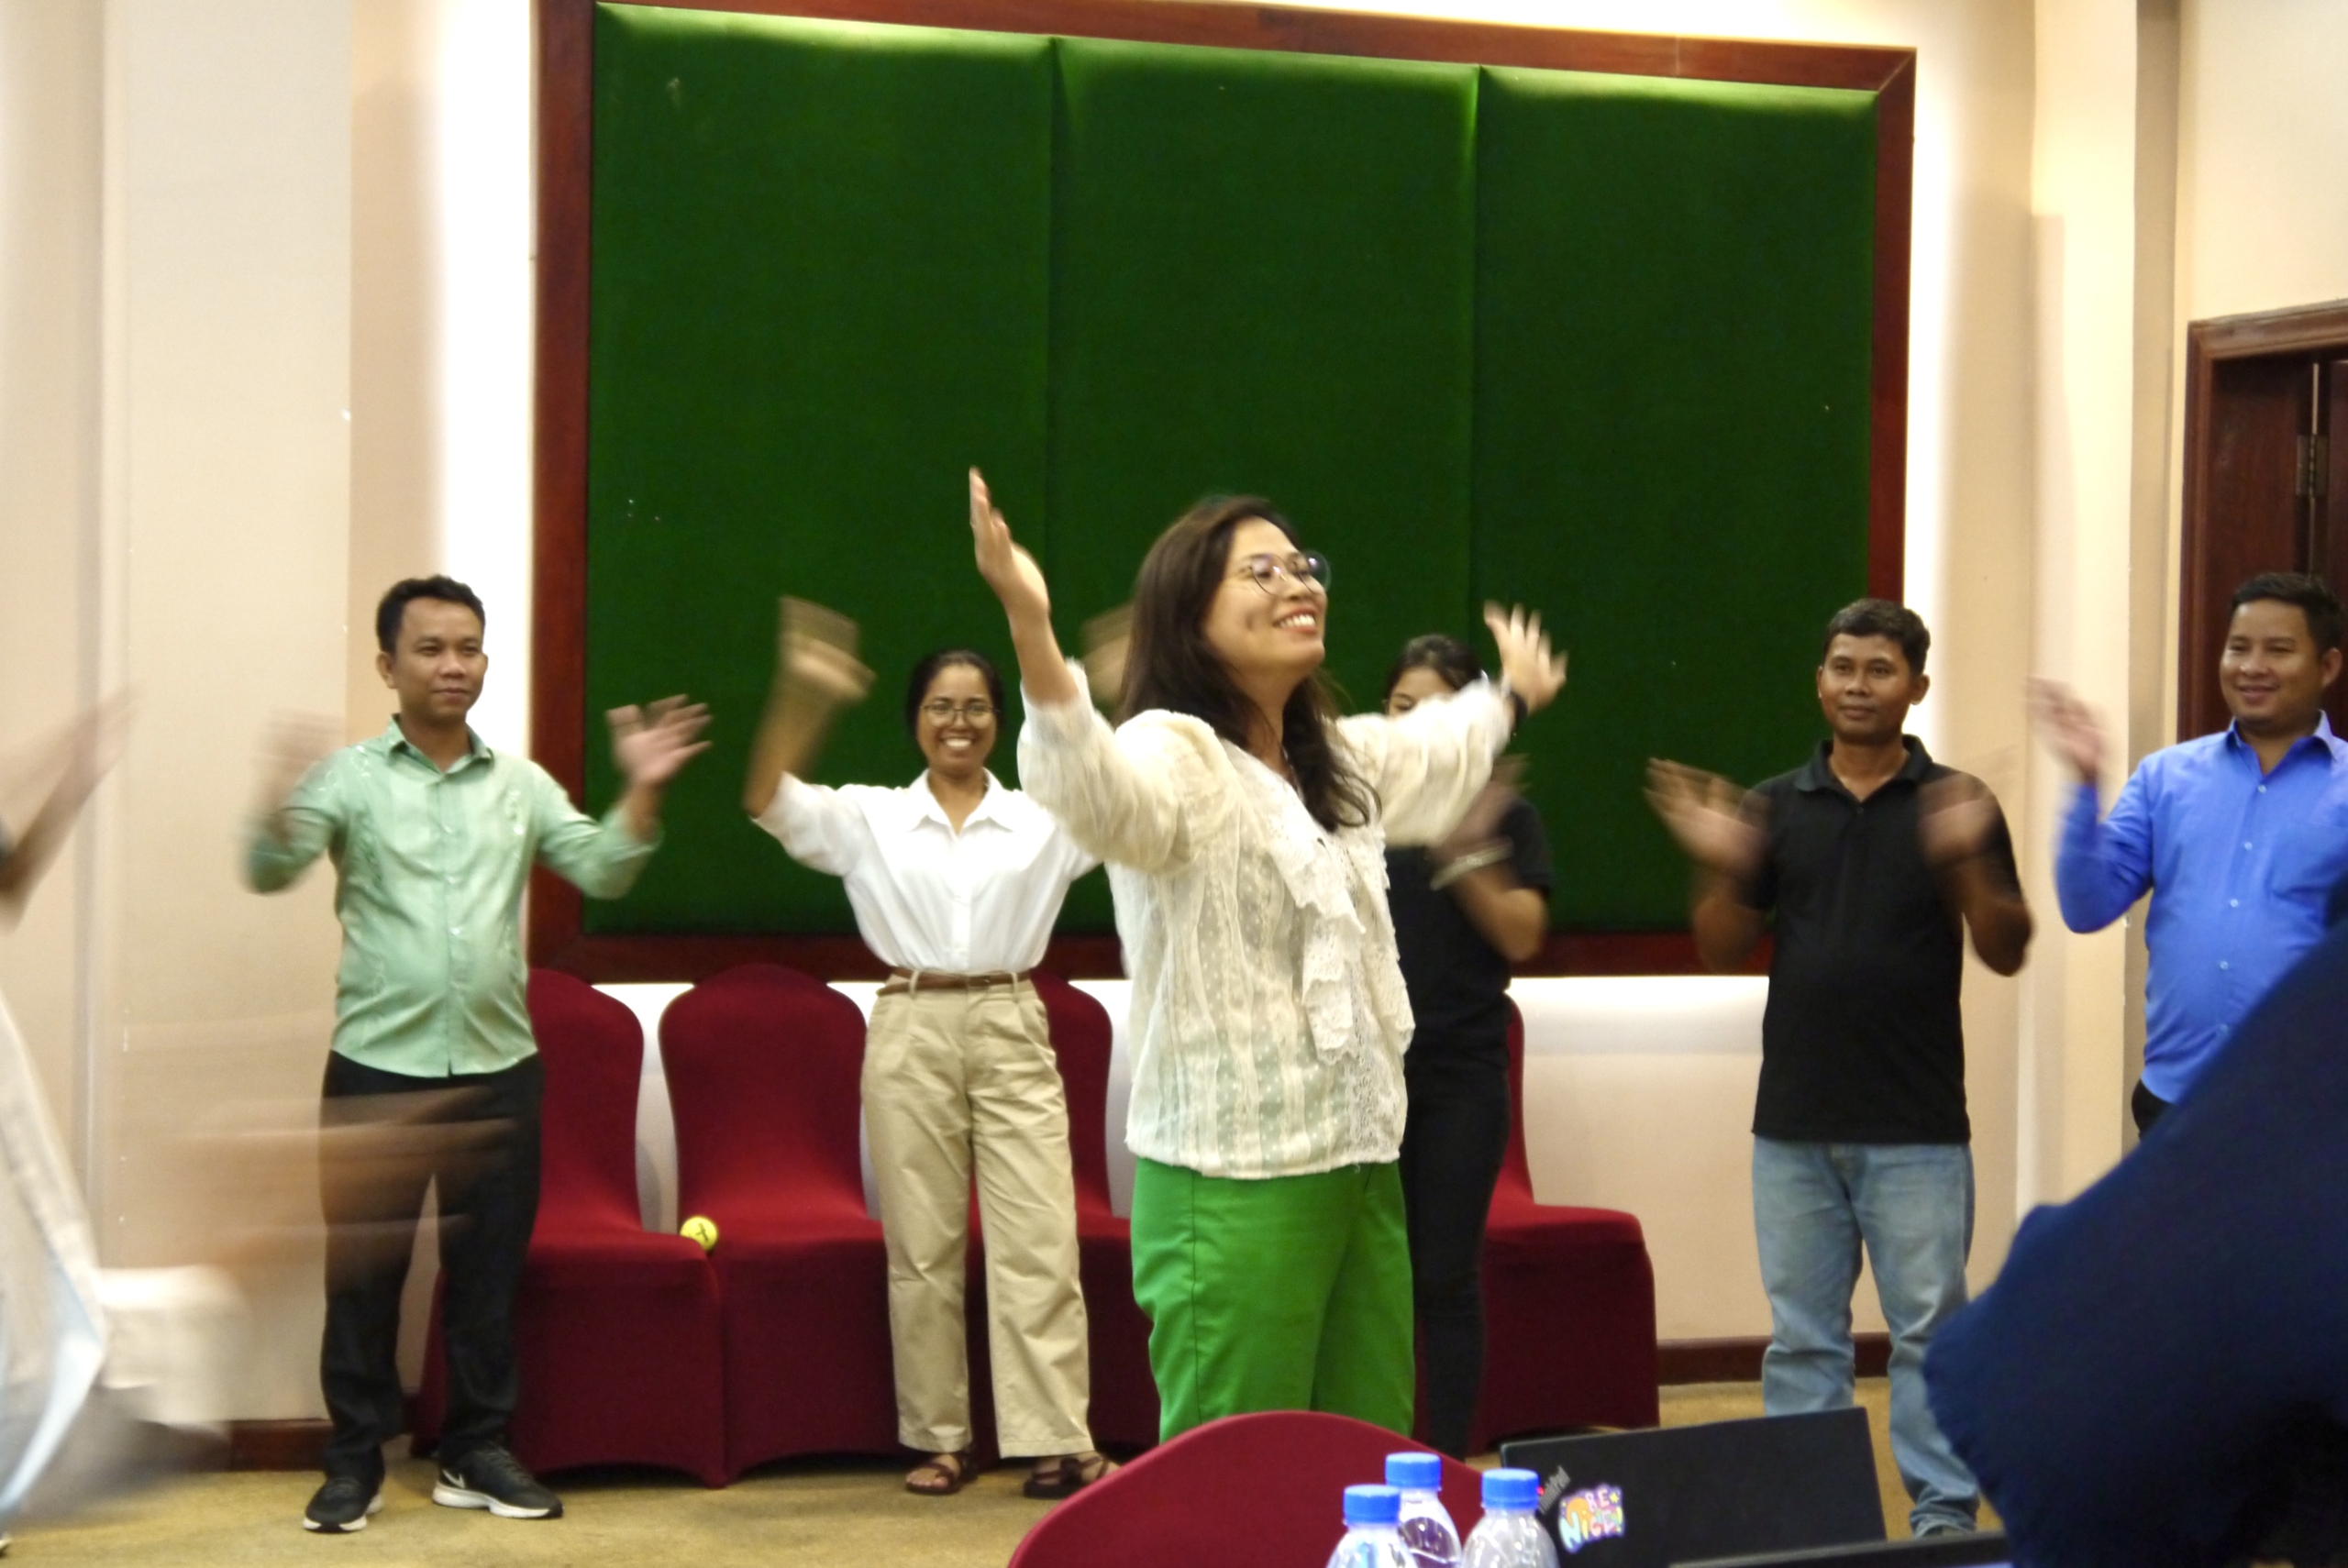 Interactive exercises during the workshop!